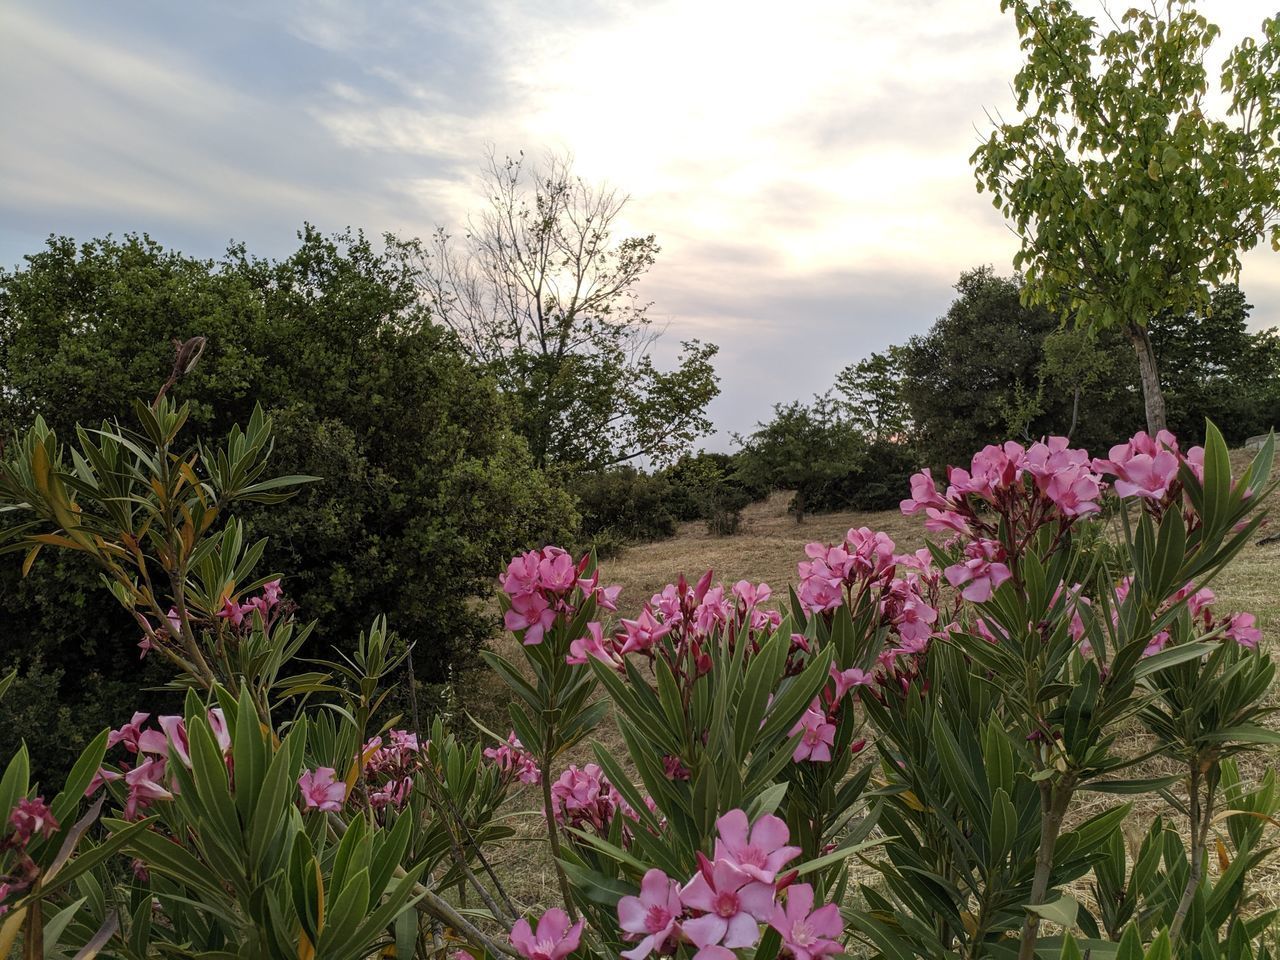 CLOSE-UP OF PINK FLOWERING PLANTS AND TREES AGAINST SKY